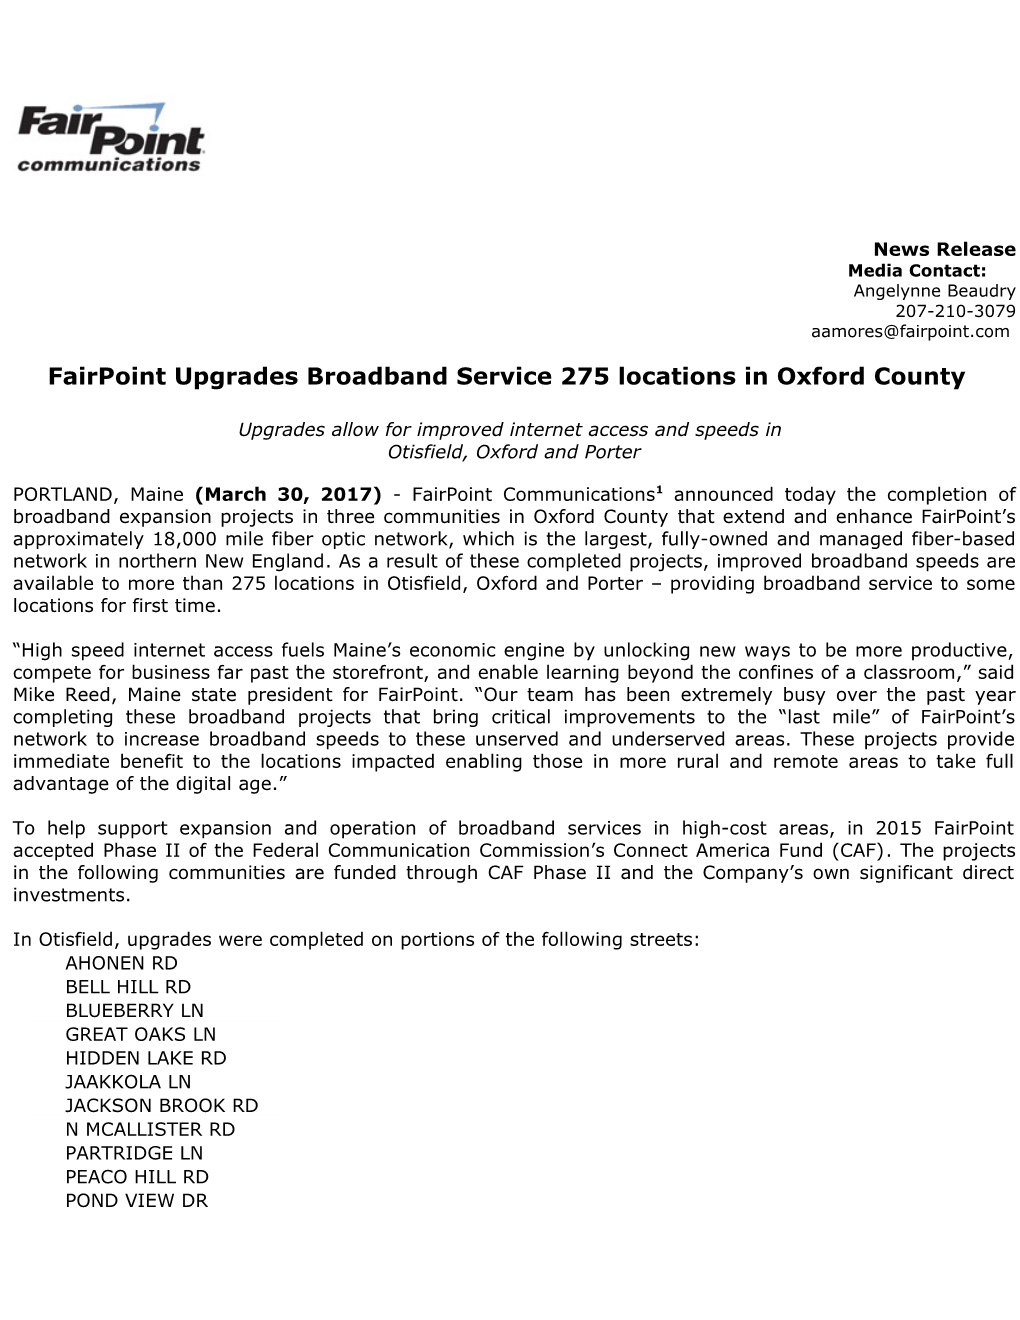 Fairpoint Upgrades Broadband Service 275 Locations in Oxford County